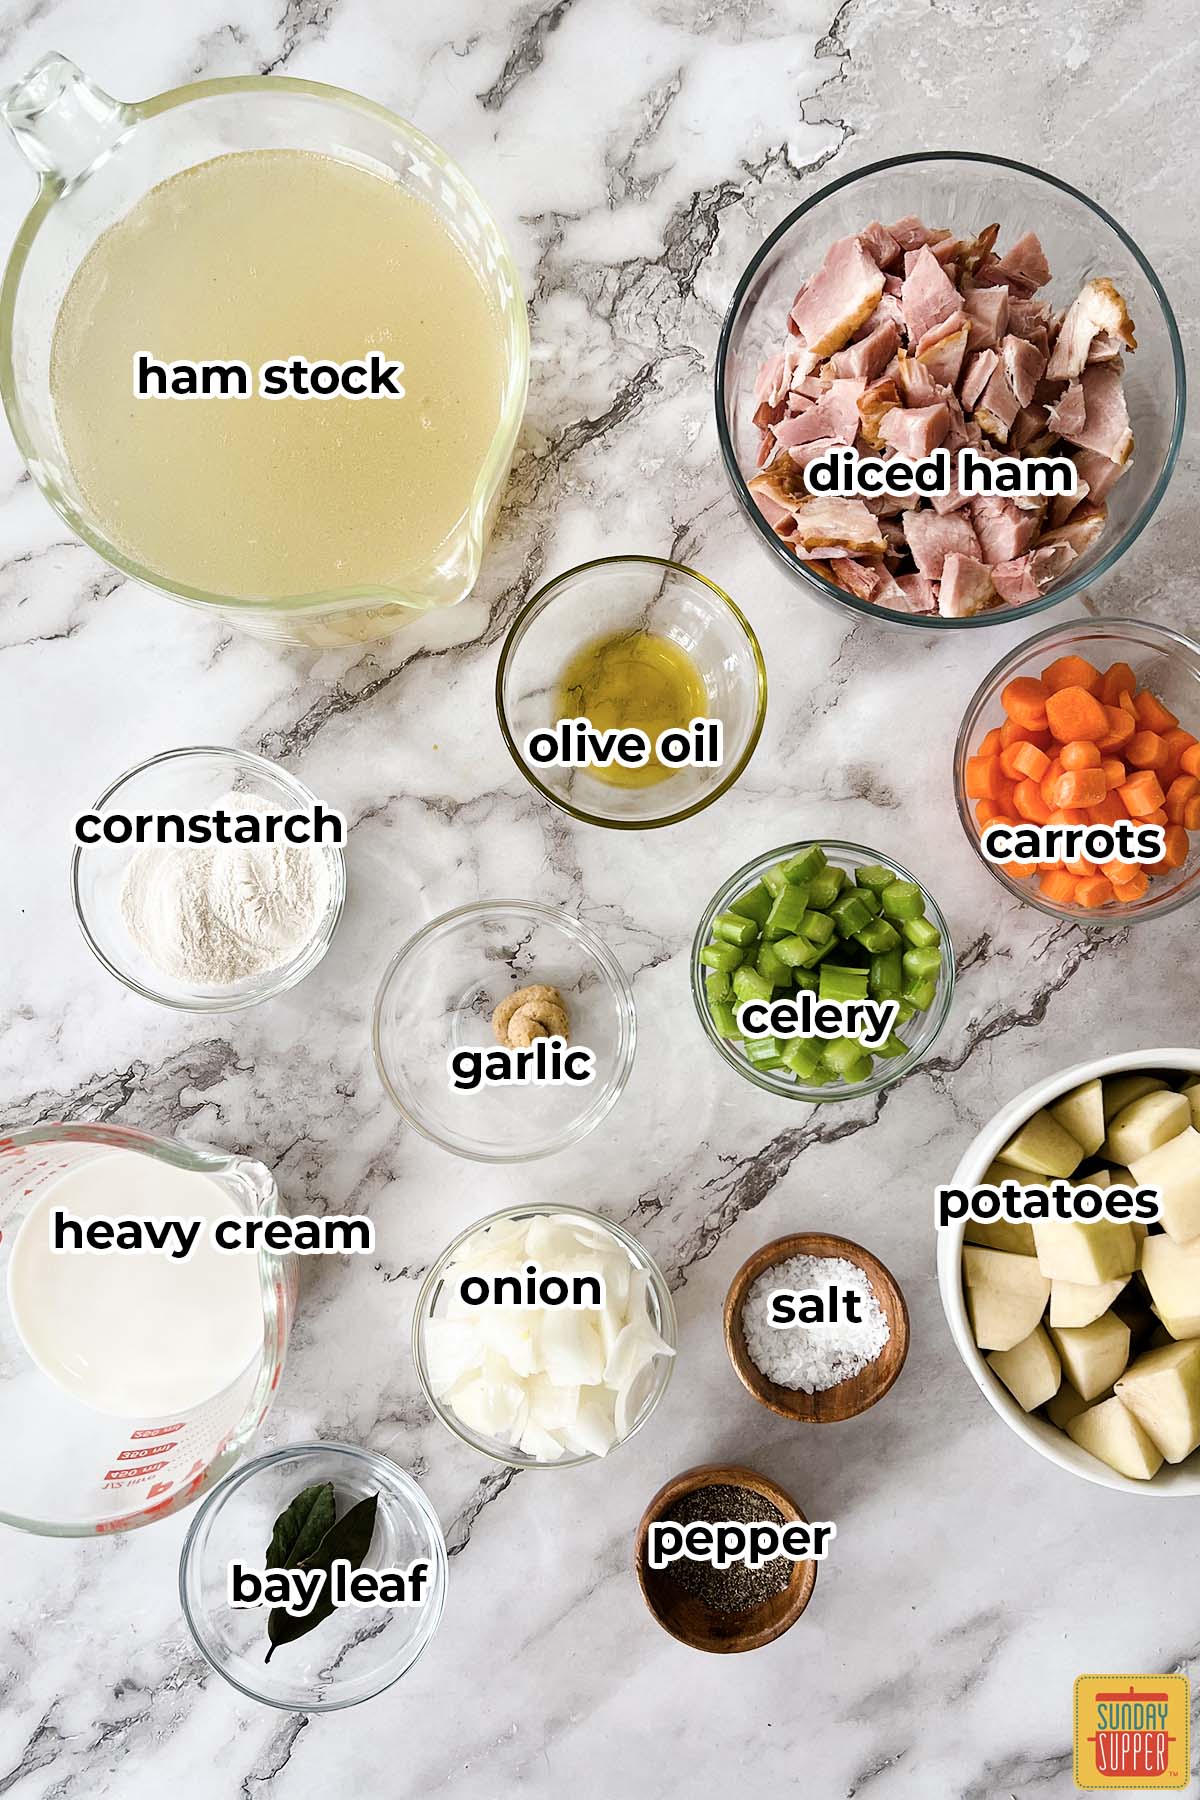 ingredients for ham stock soup on a white surface with labels